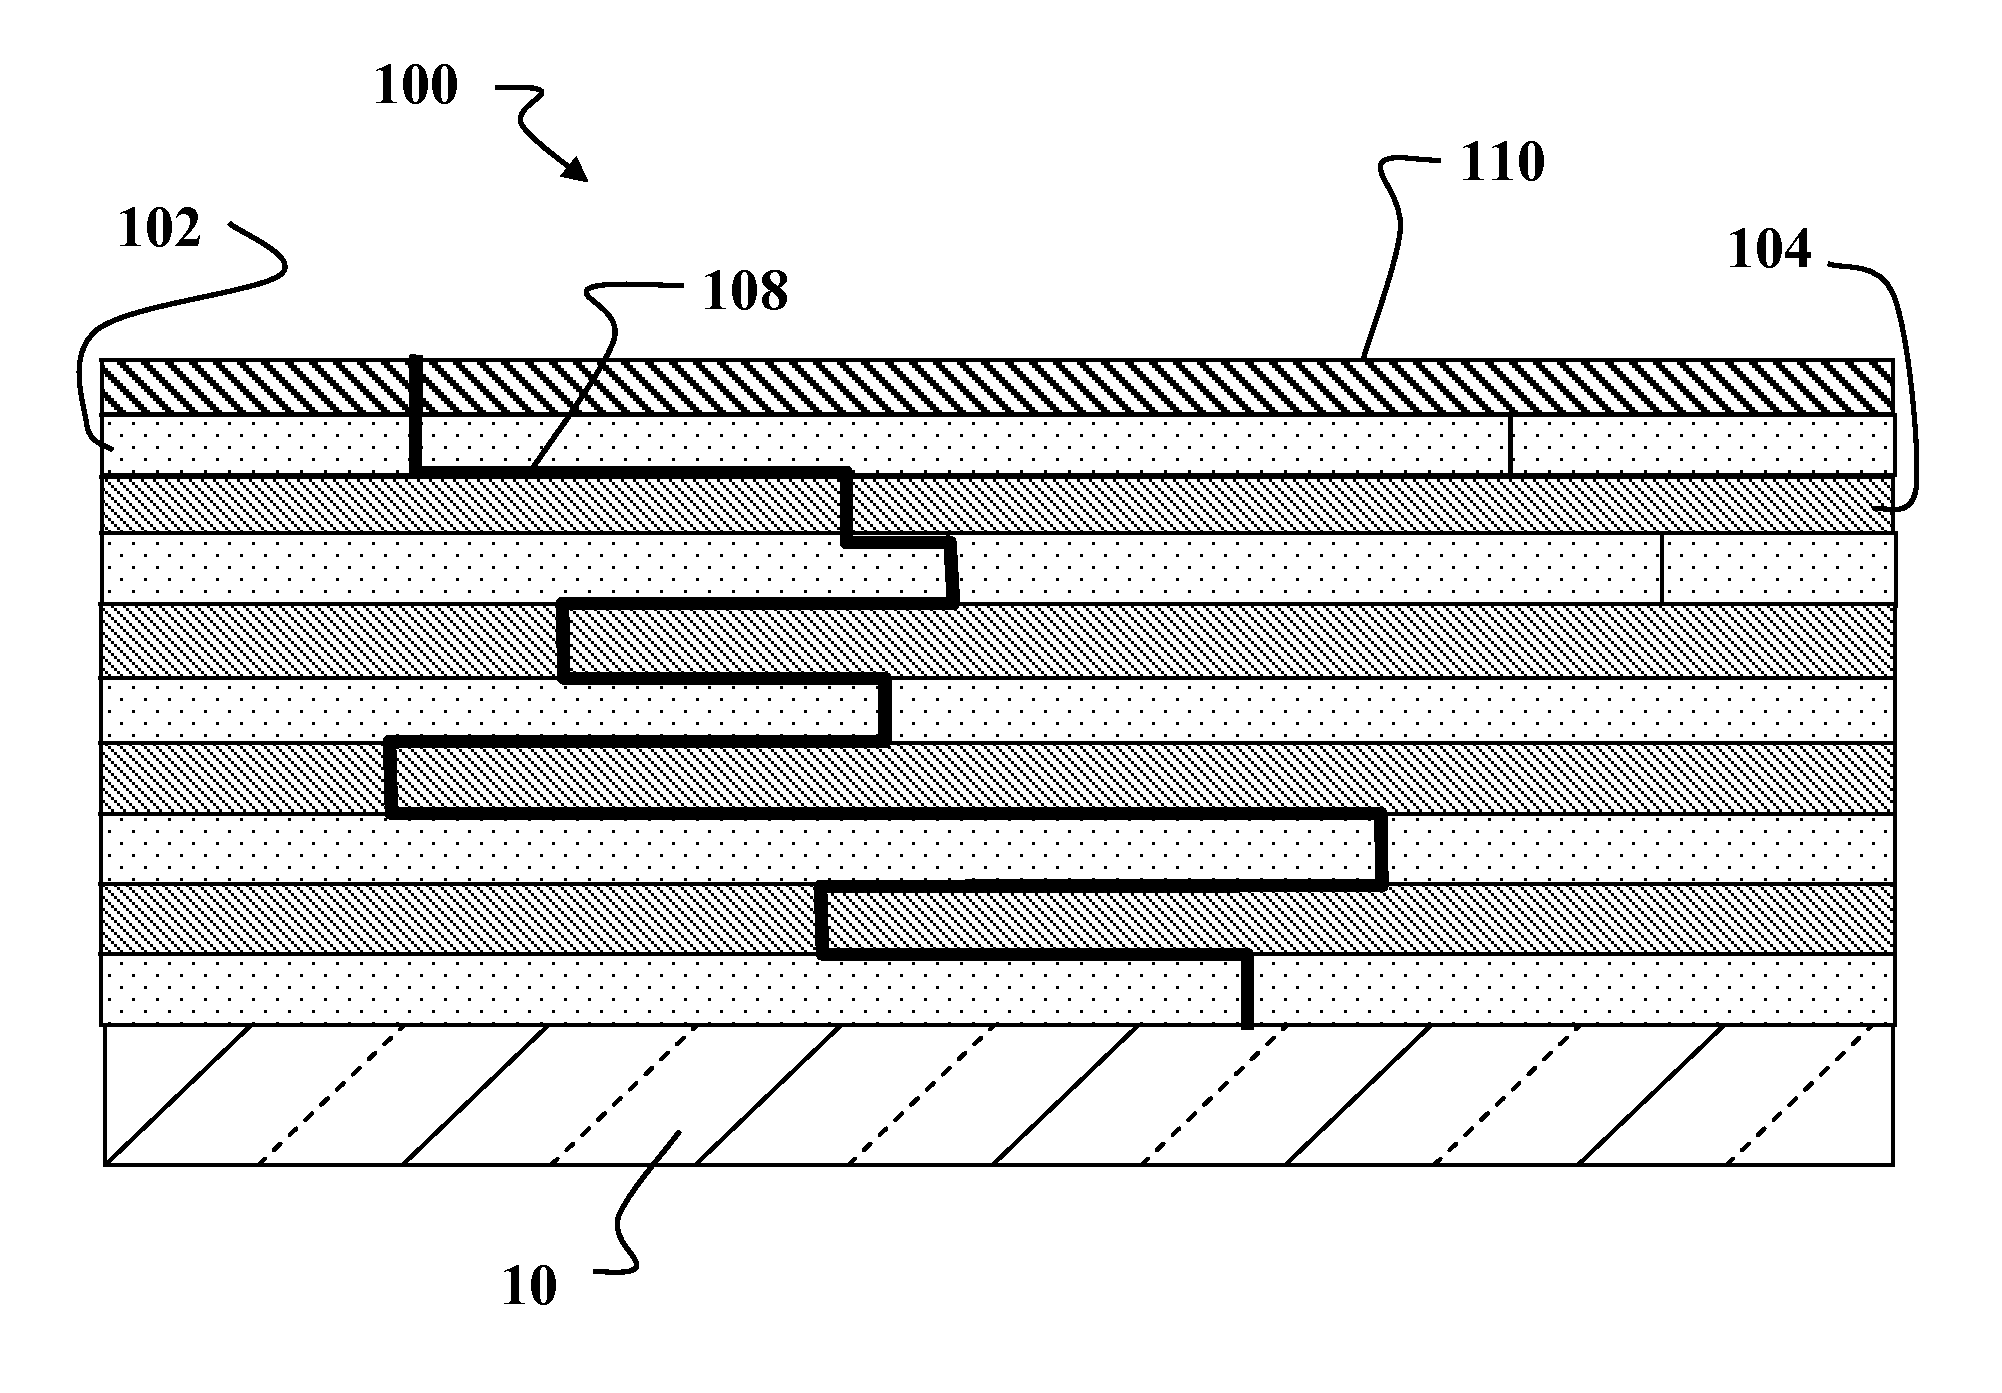 Individually encapsulated solar cells and solar cell strings